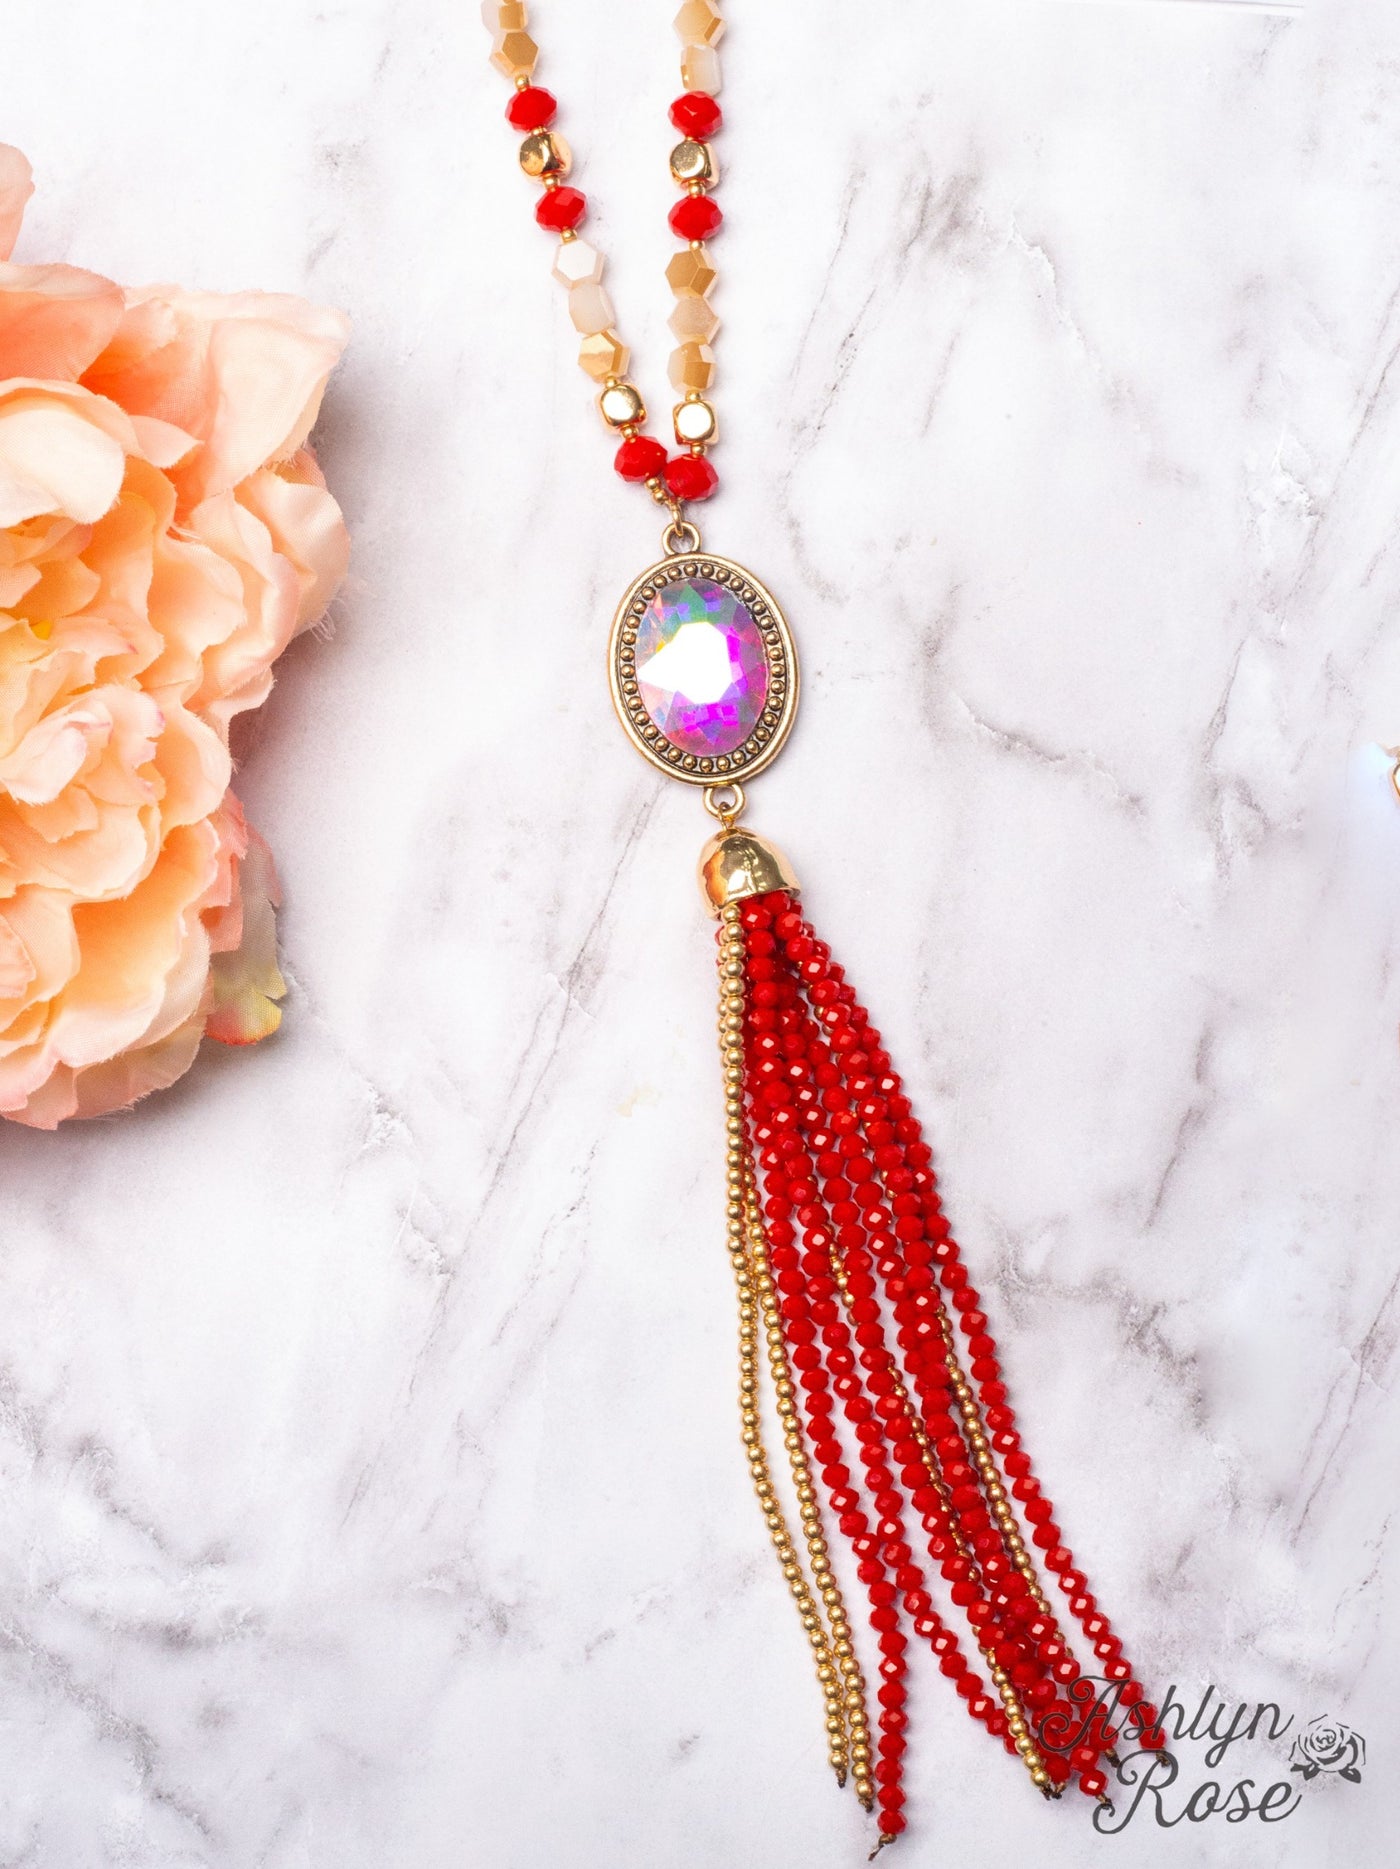 CRASH MY PARTY OVAL IRIDESCENT CRYSTAL BEADED TASSEL PENDANT ON A CRYSTAL BEADED GOLD LINKED CHAIN NECKLACE, RED